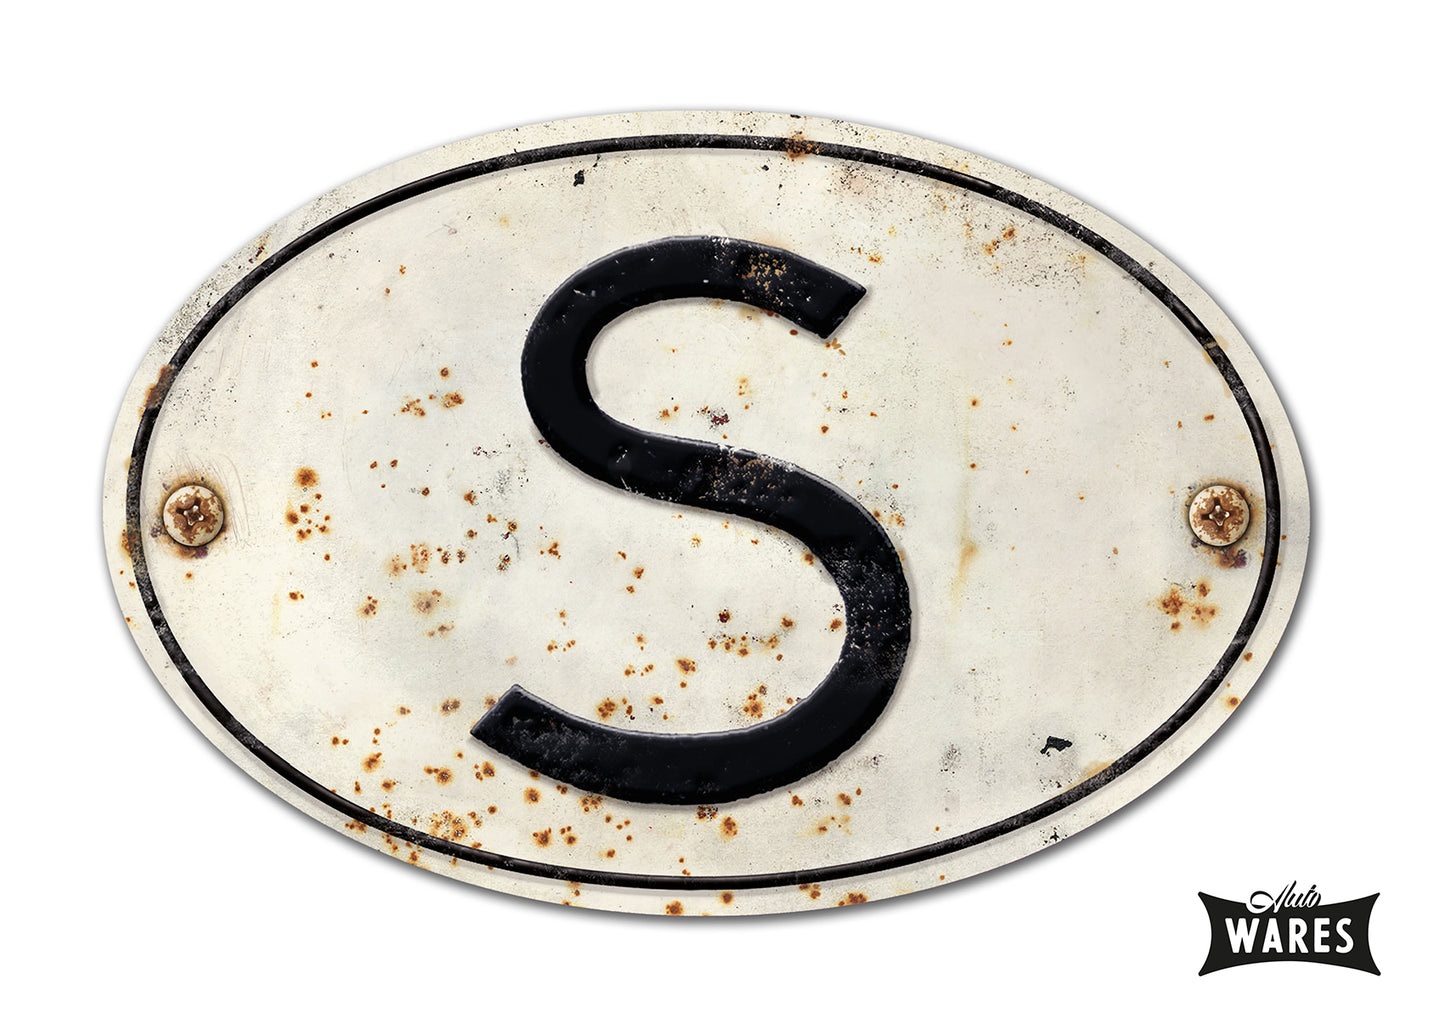 MAGNETIC SWEDEN "S" COUNTRY BADGE